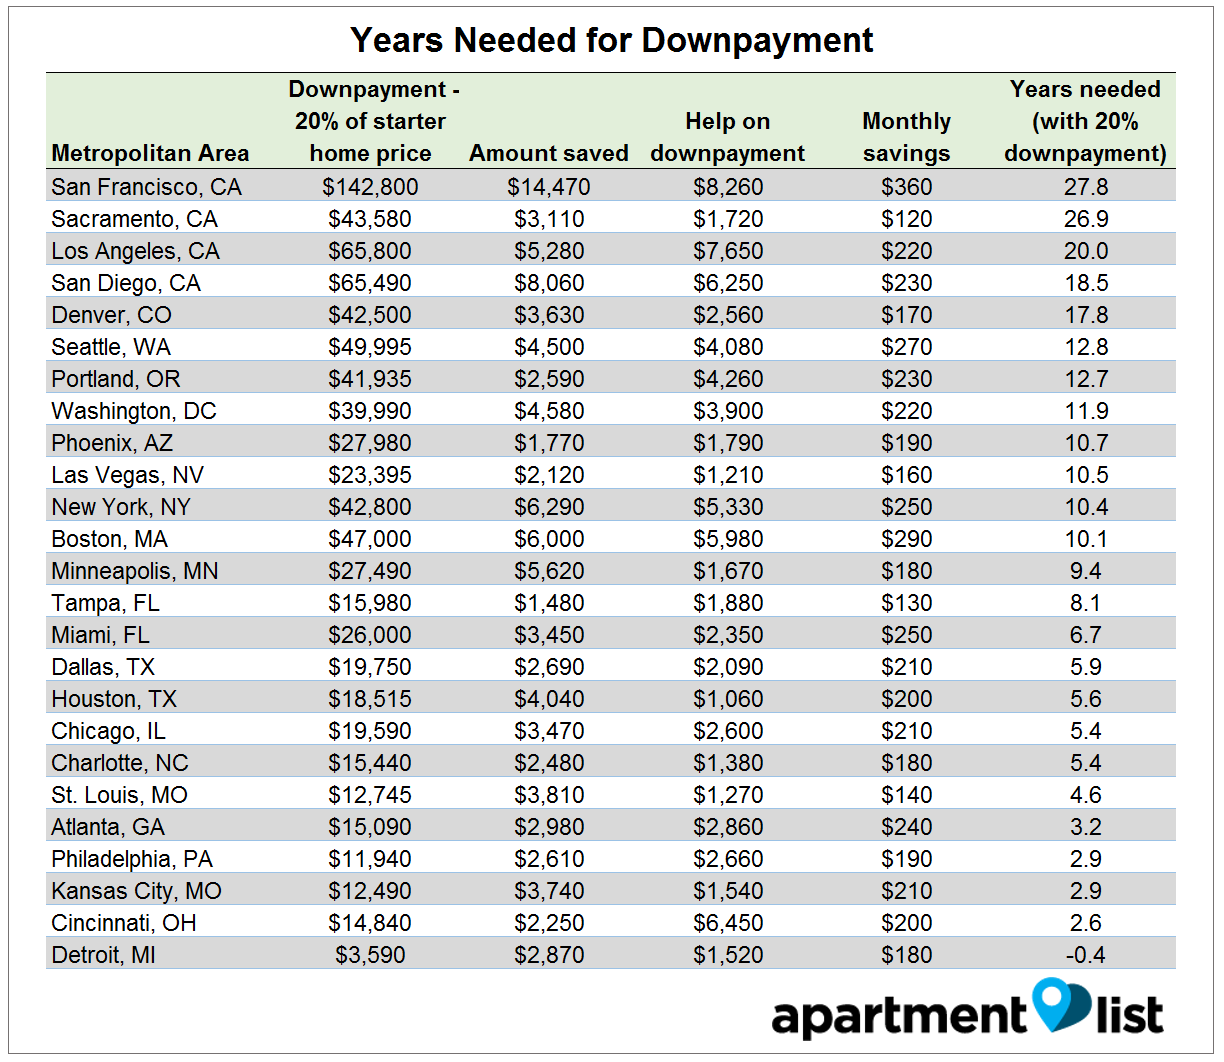 years needed for downpayment